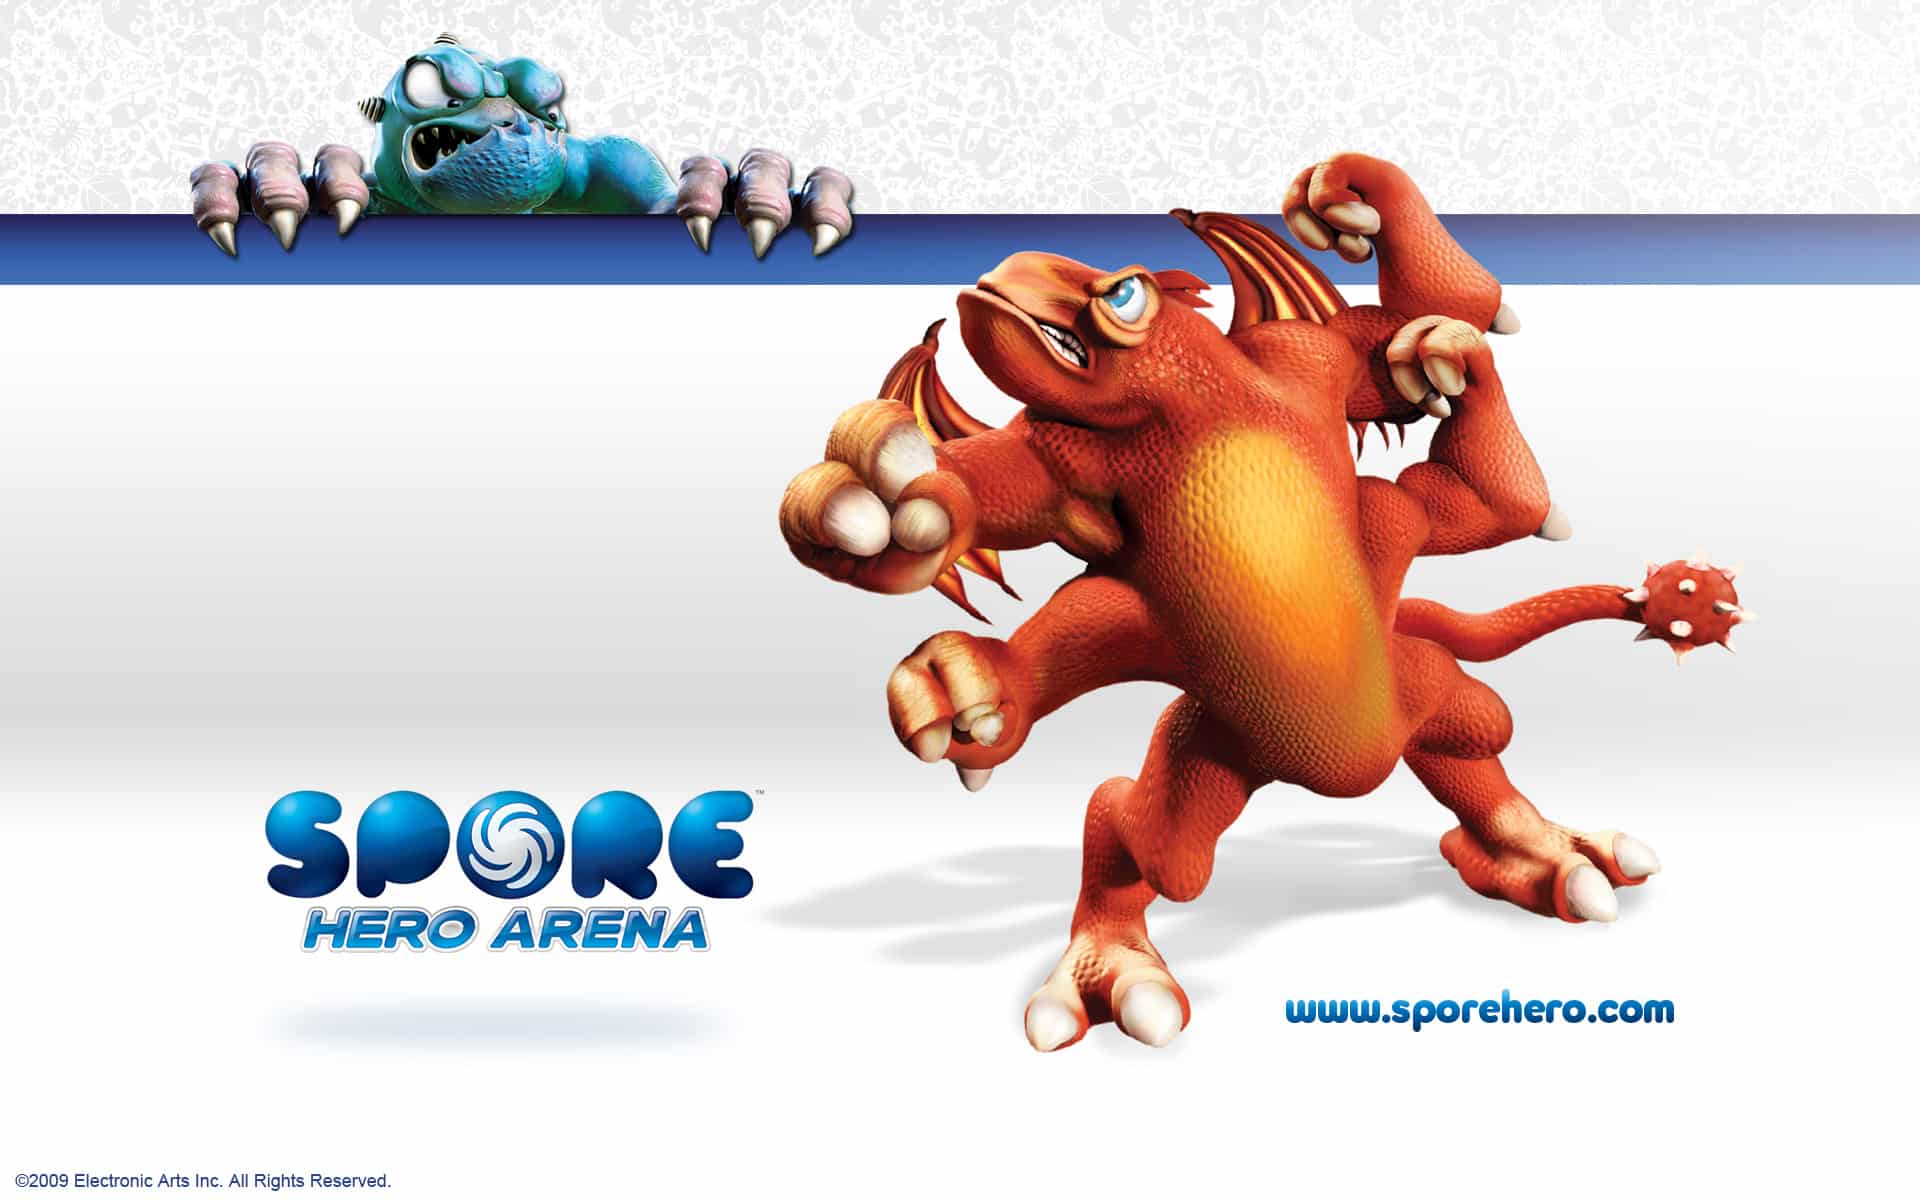  Spore Hero Arena wallpapers. Click on each thumbnail for the wallpaper 